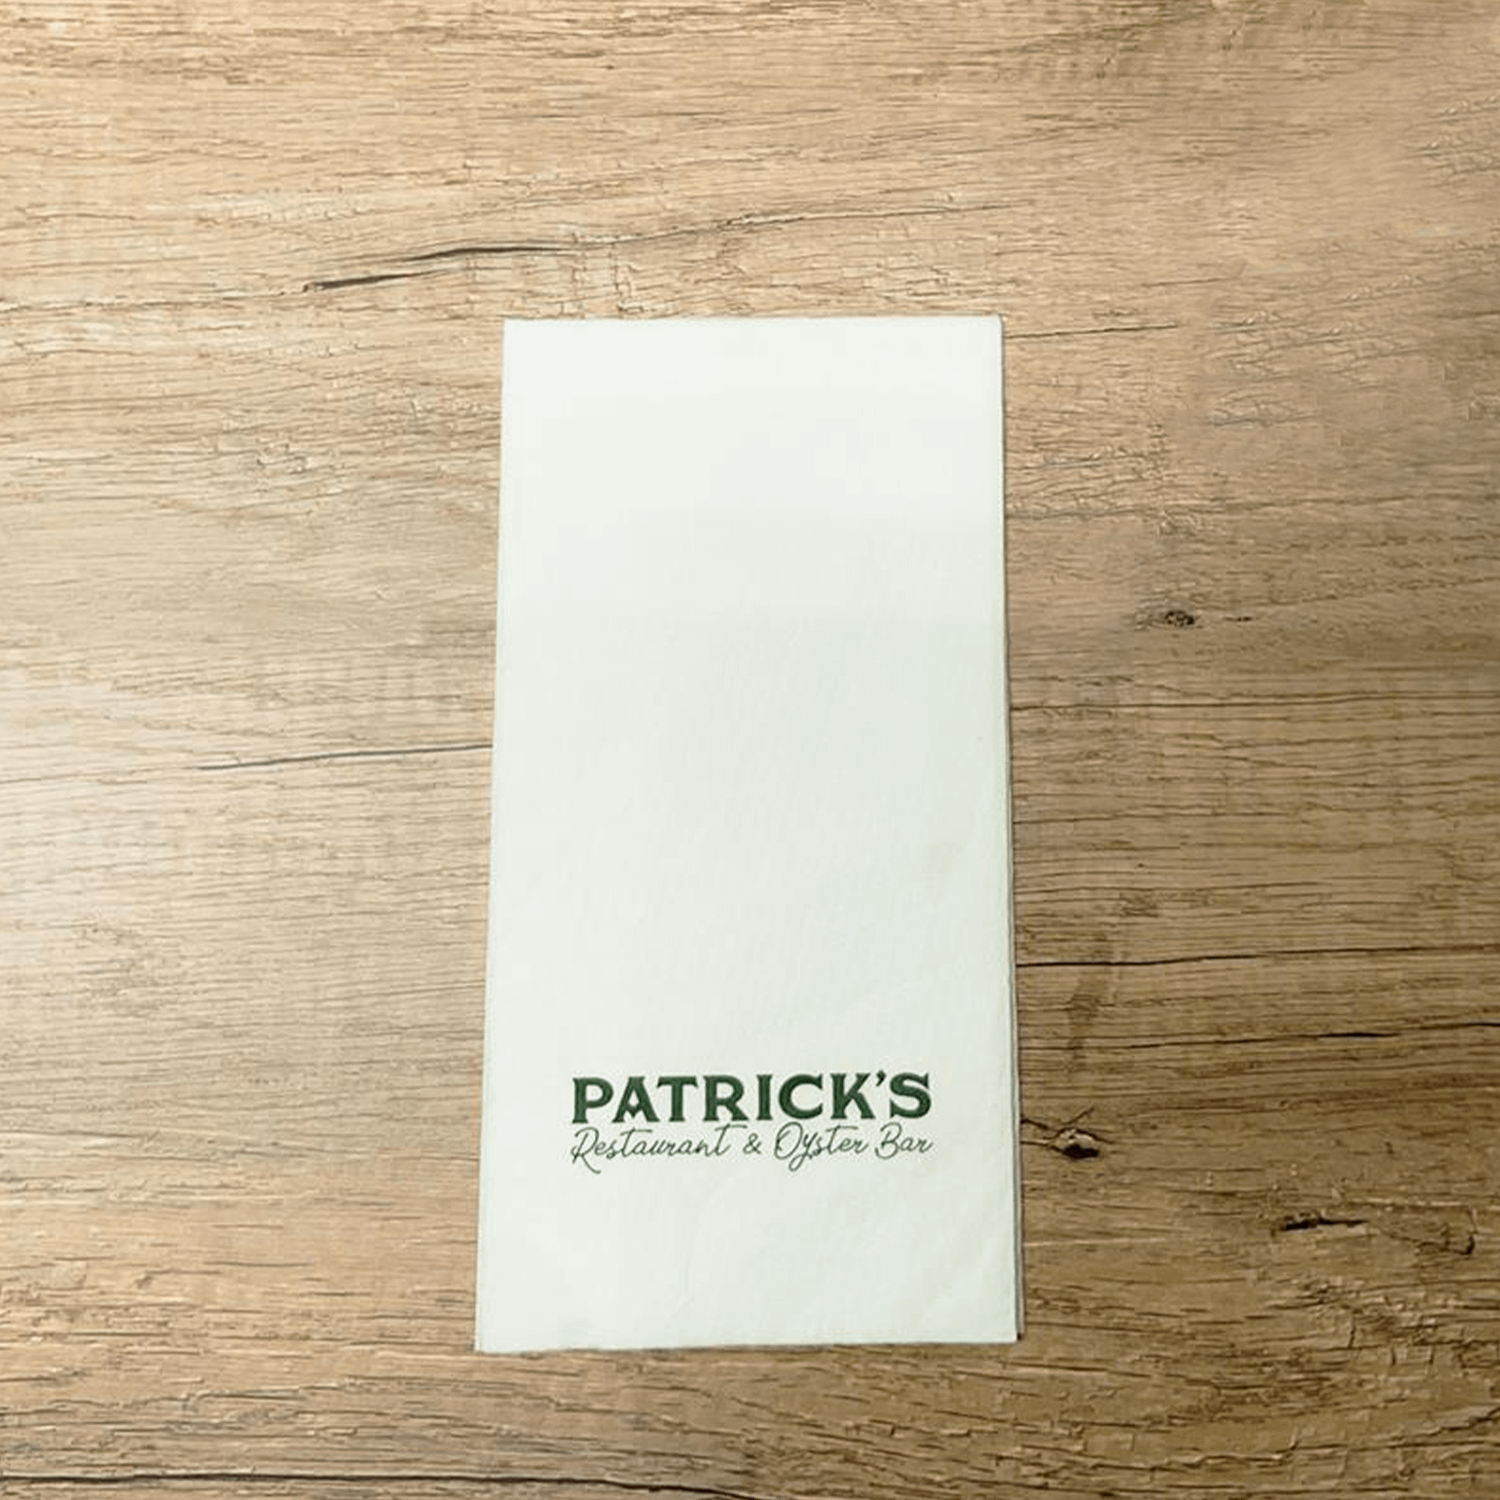 30x30cm, 2ply, 1/8 folded branded luncheon paper guest towel